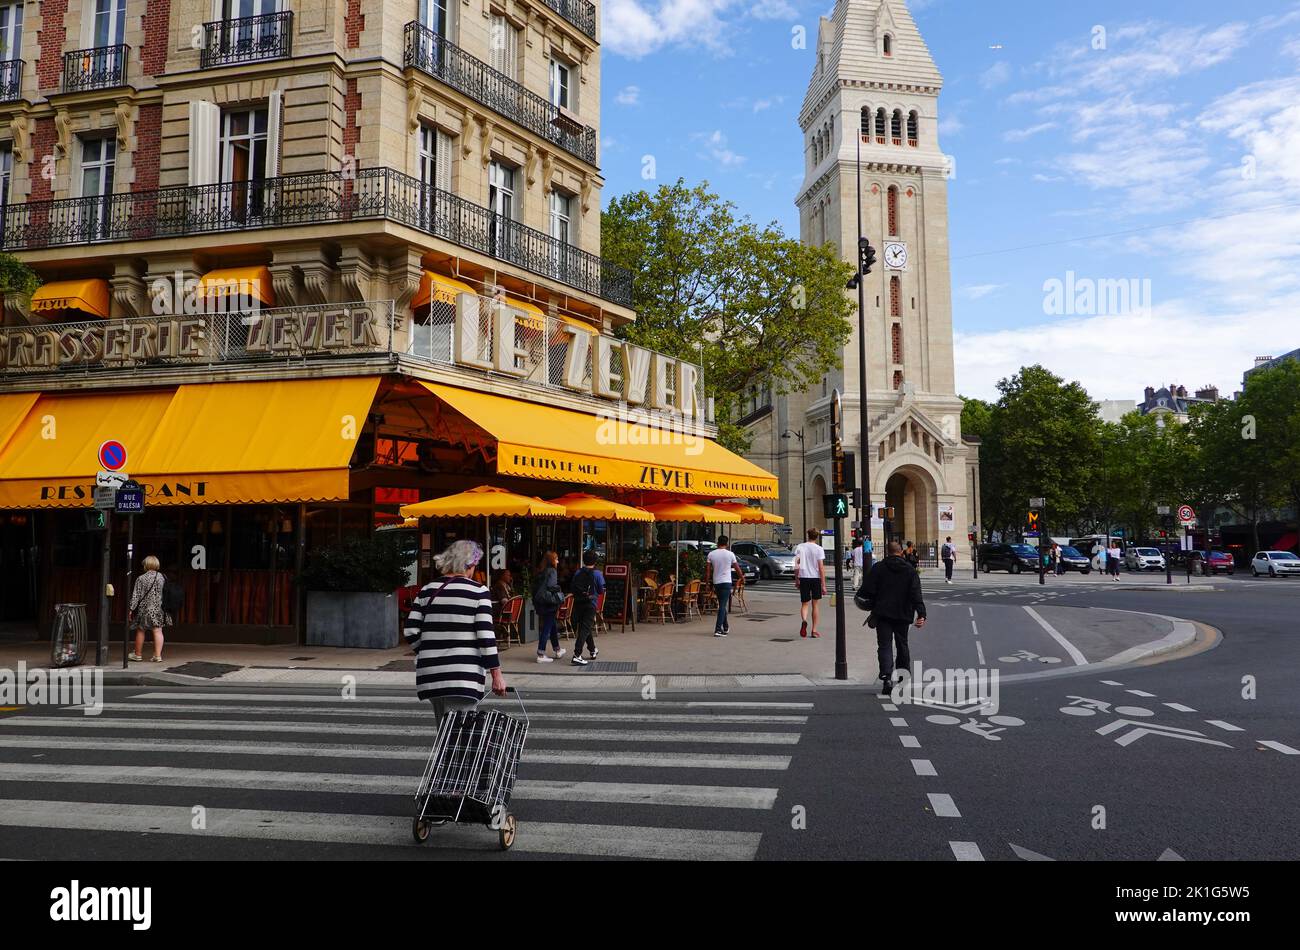 People walking in front of Brasserie Le Zeyer and Saint Pierre de Montrogue church at Alesia in the 14th arrondissement, Paris, France Stock Photo